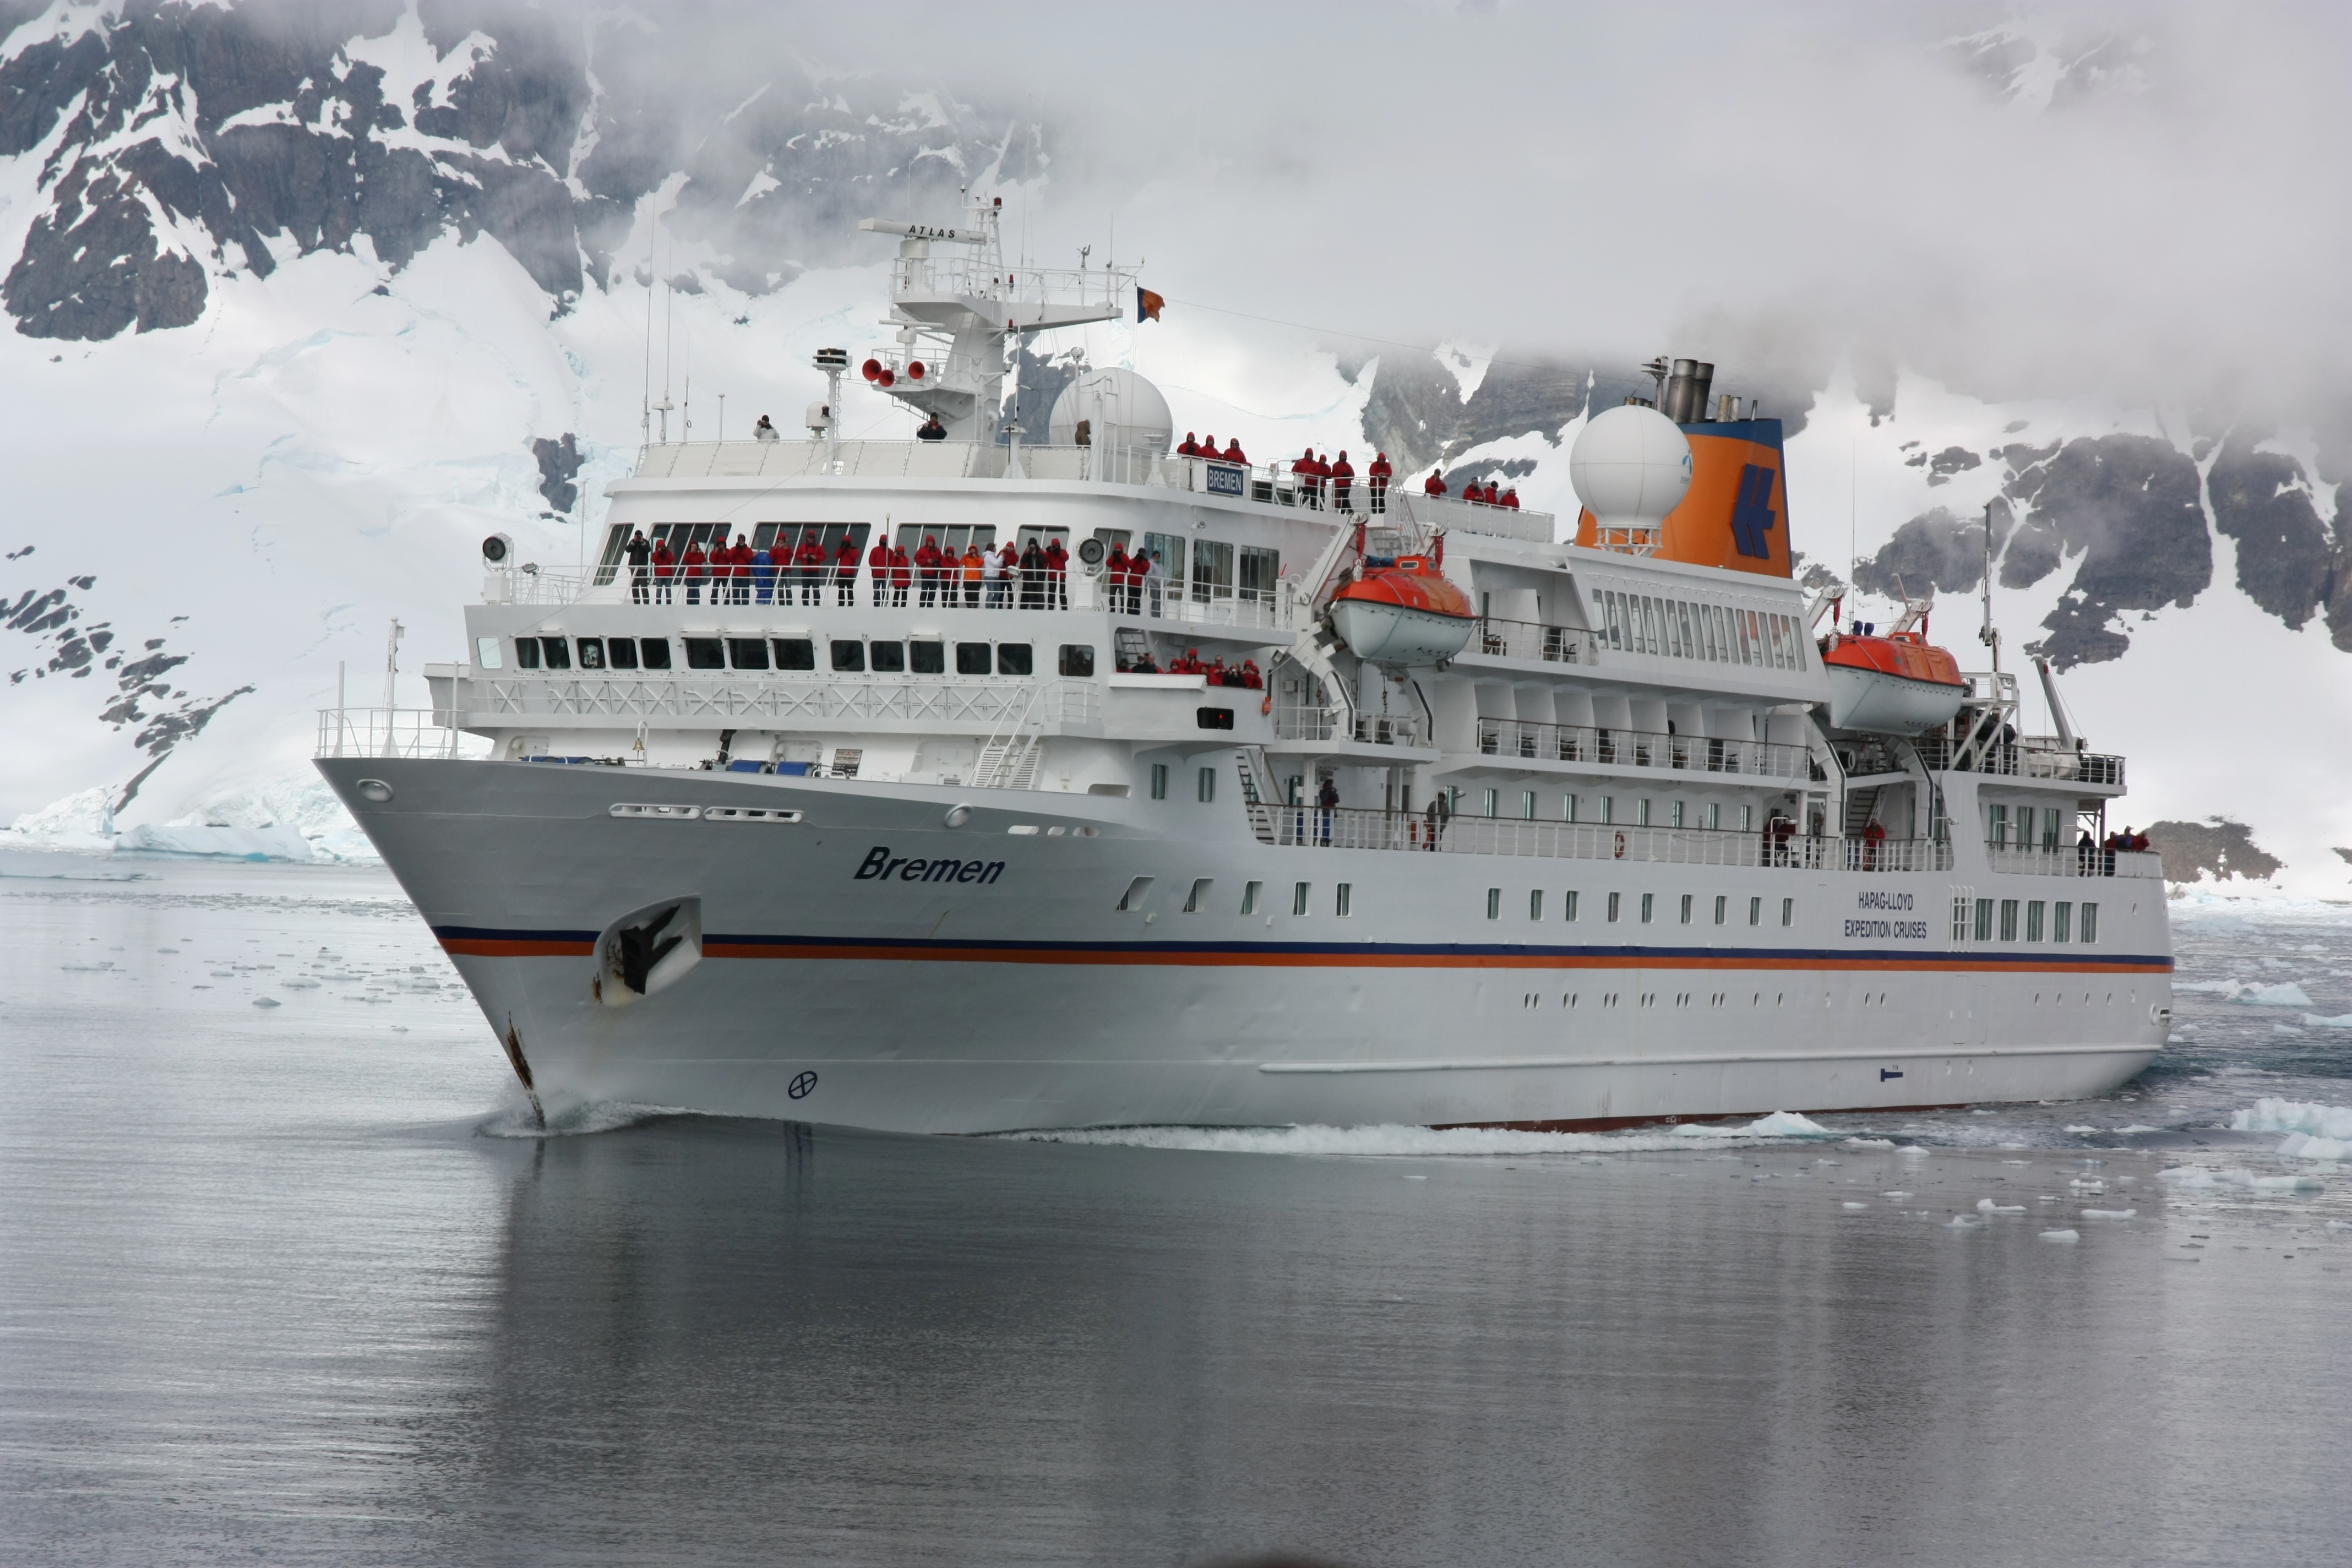 Travelling by cruise ship to Antarctica | Umweltbundesamt